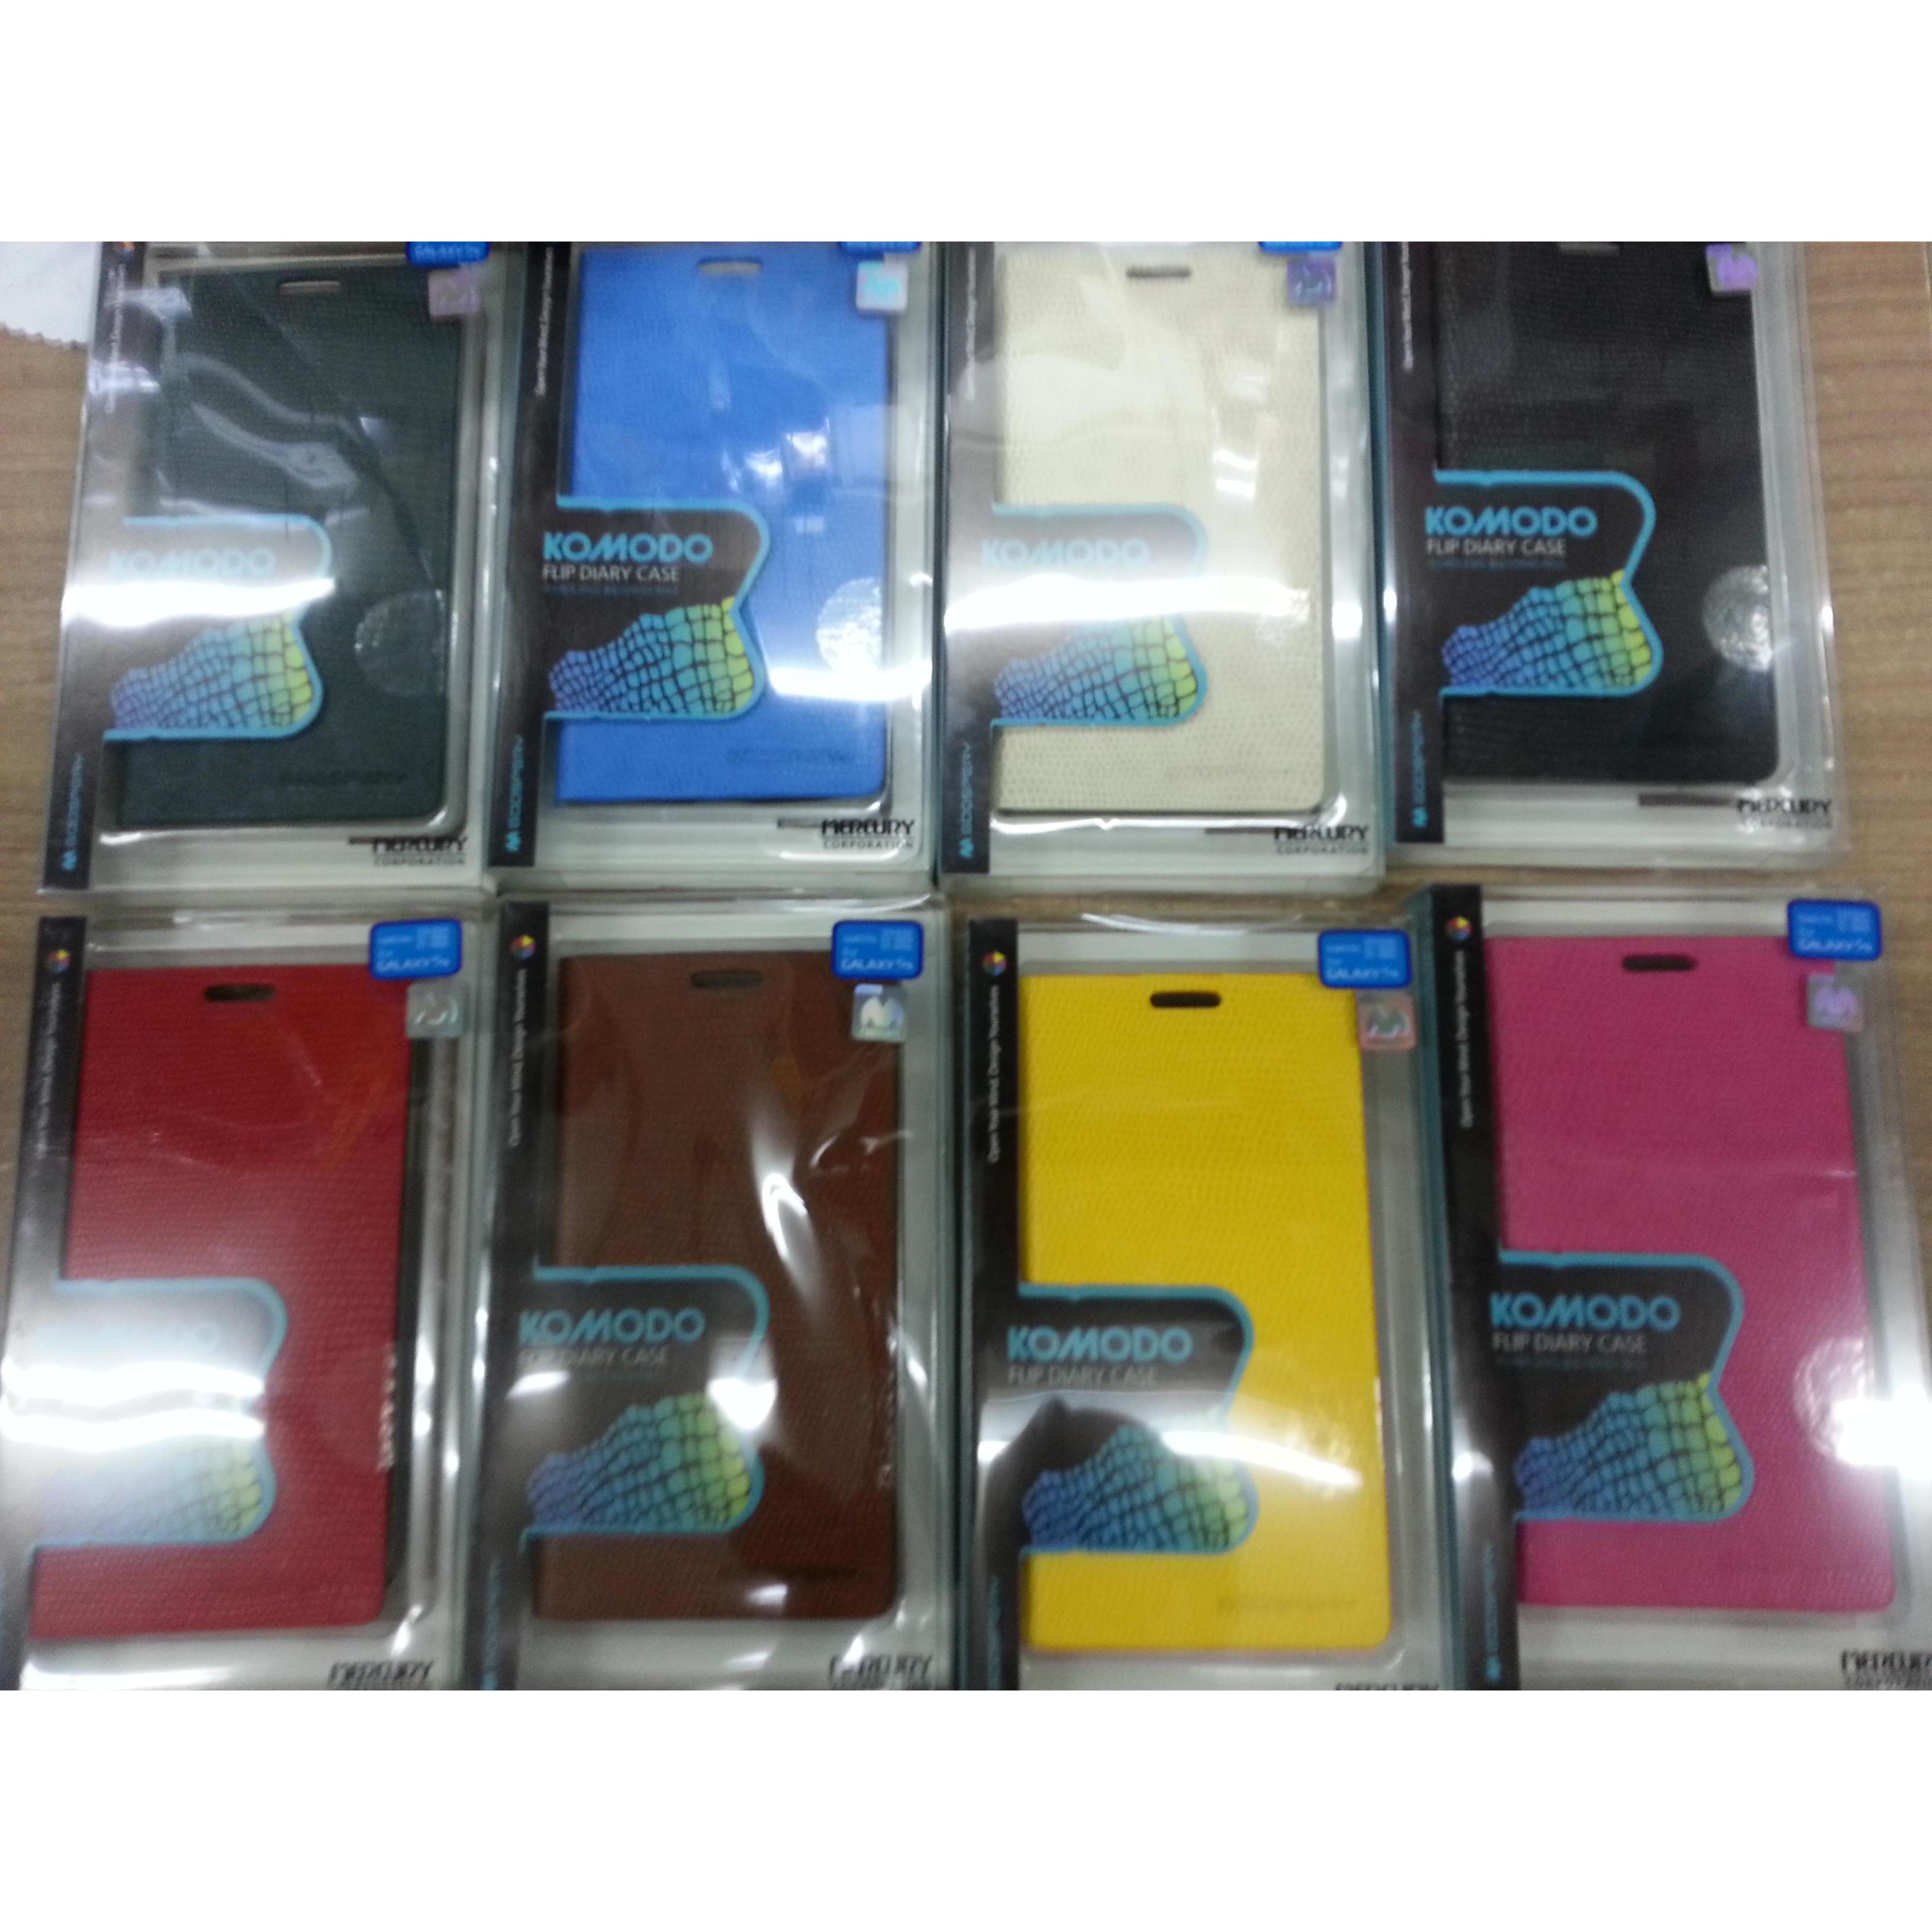 Samsung s4 i9505/6 Wholesale Suppliers